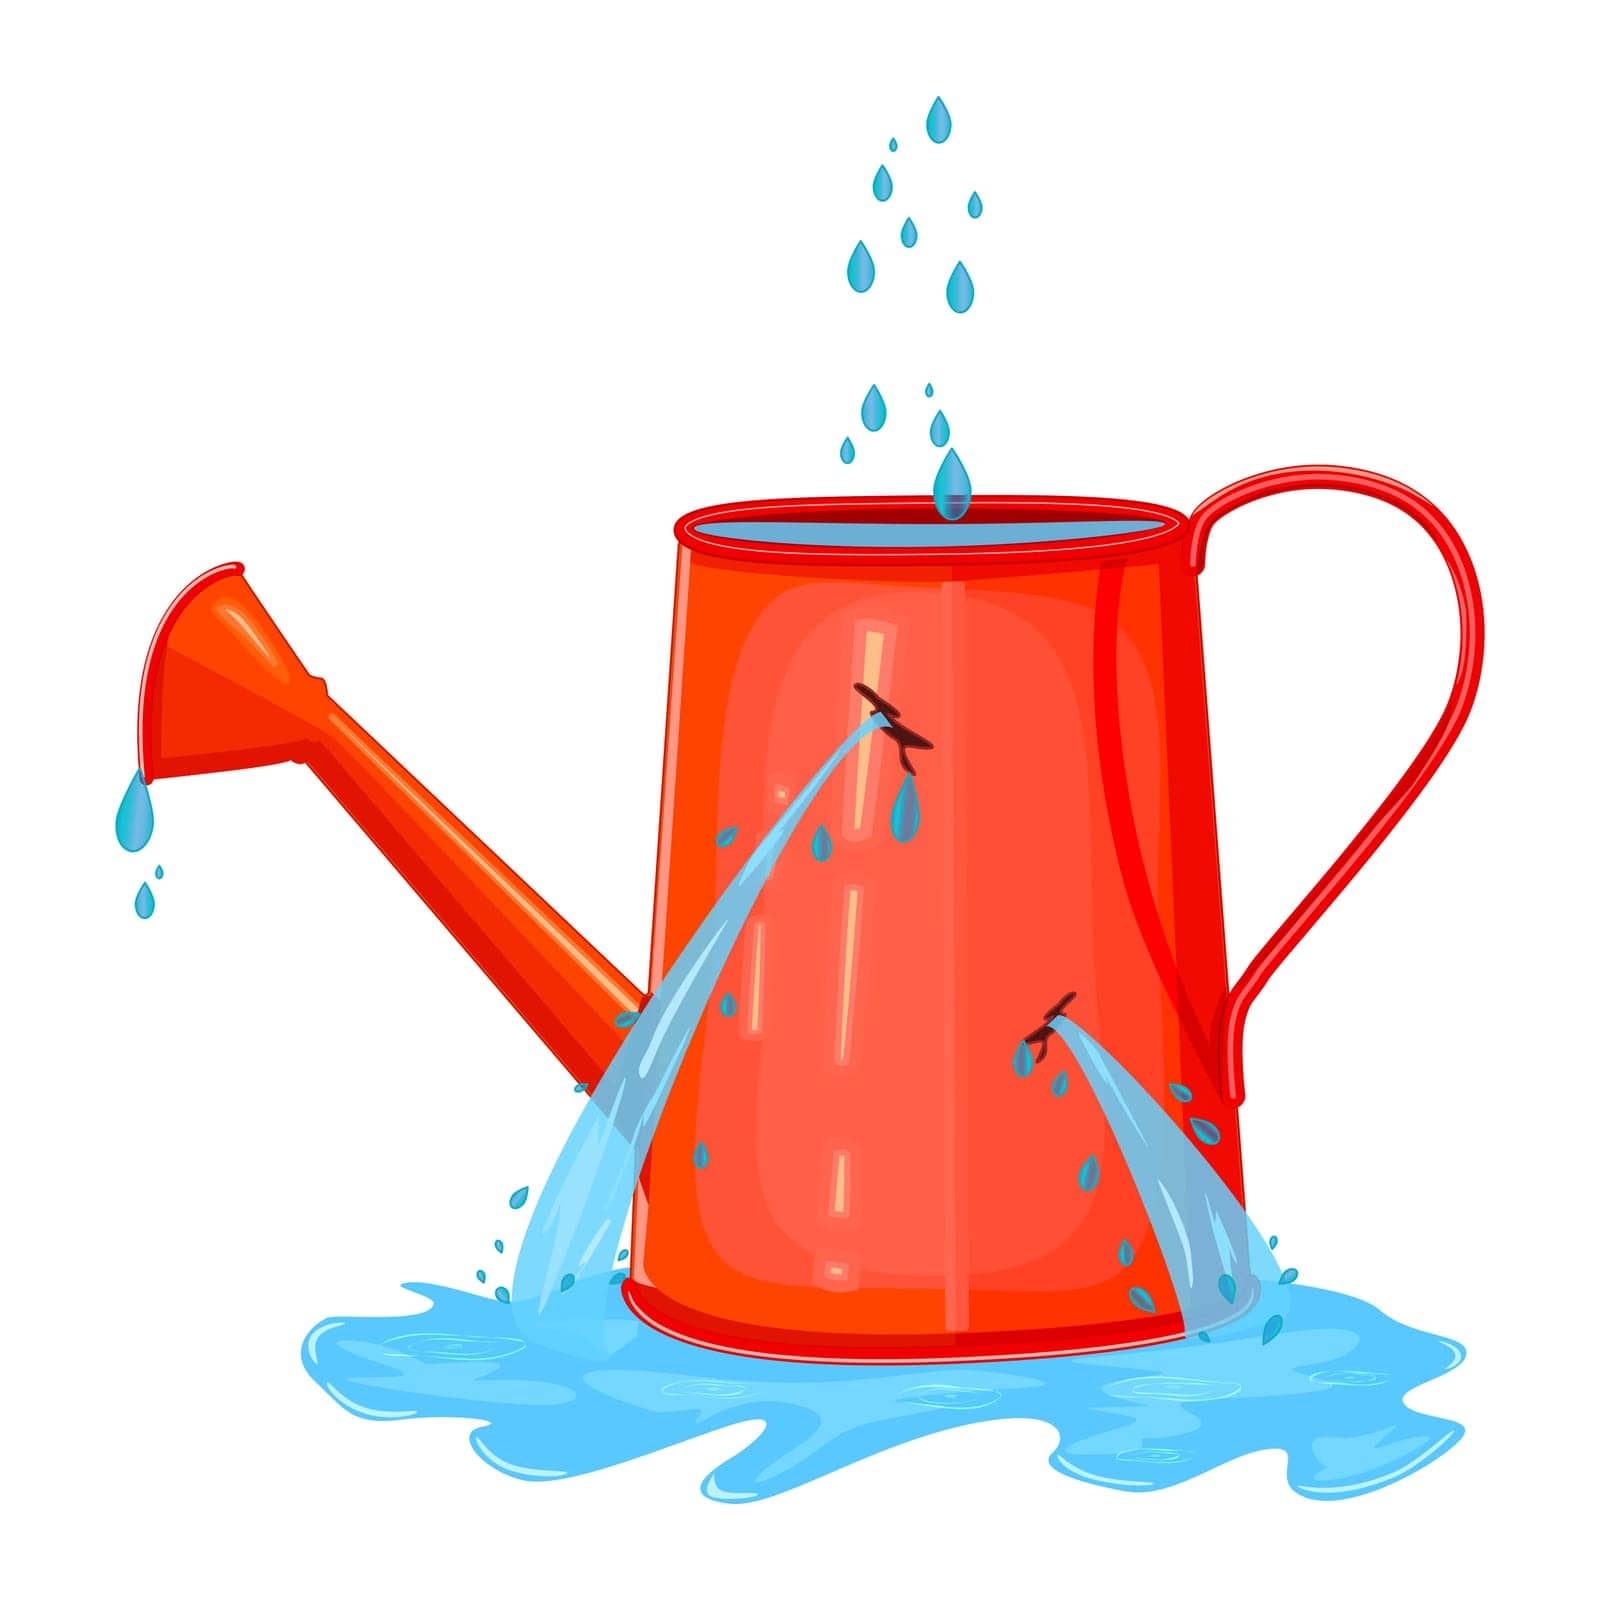 Leaking watering can and puddle isolated on white background. Pail with hole full water. by KajaNi